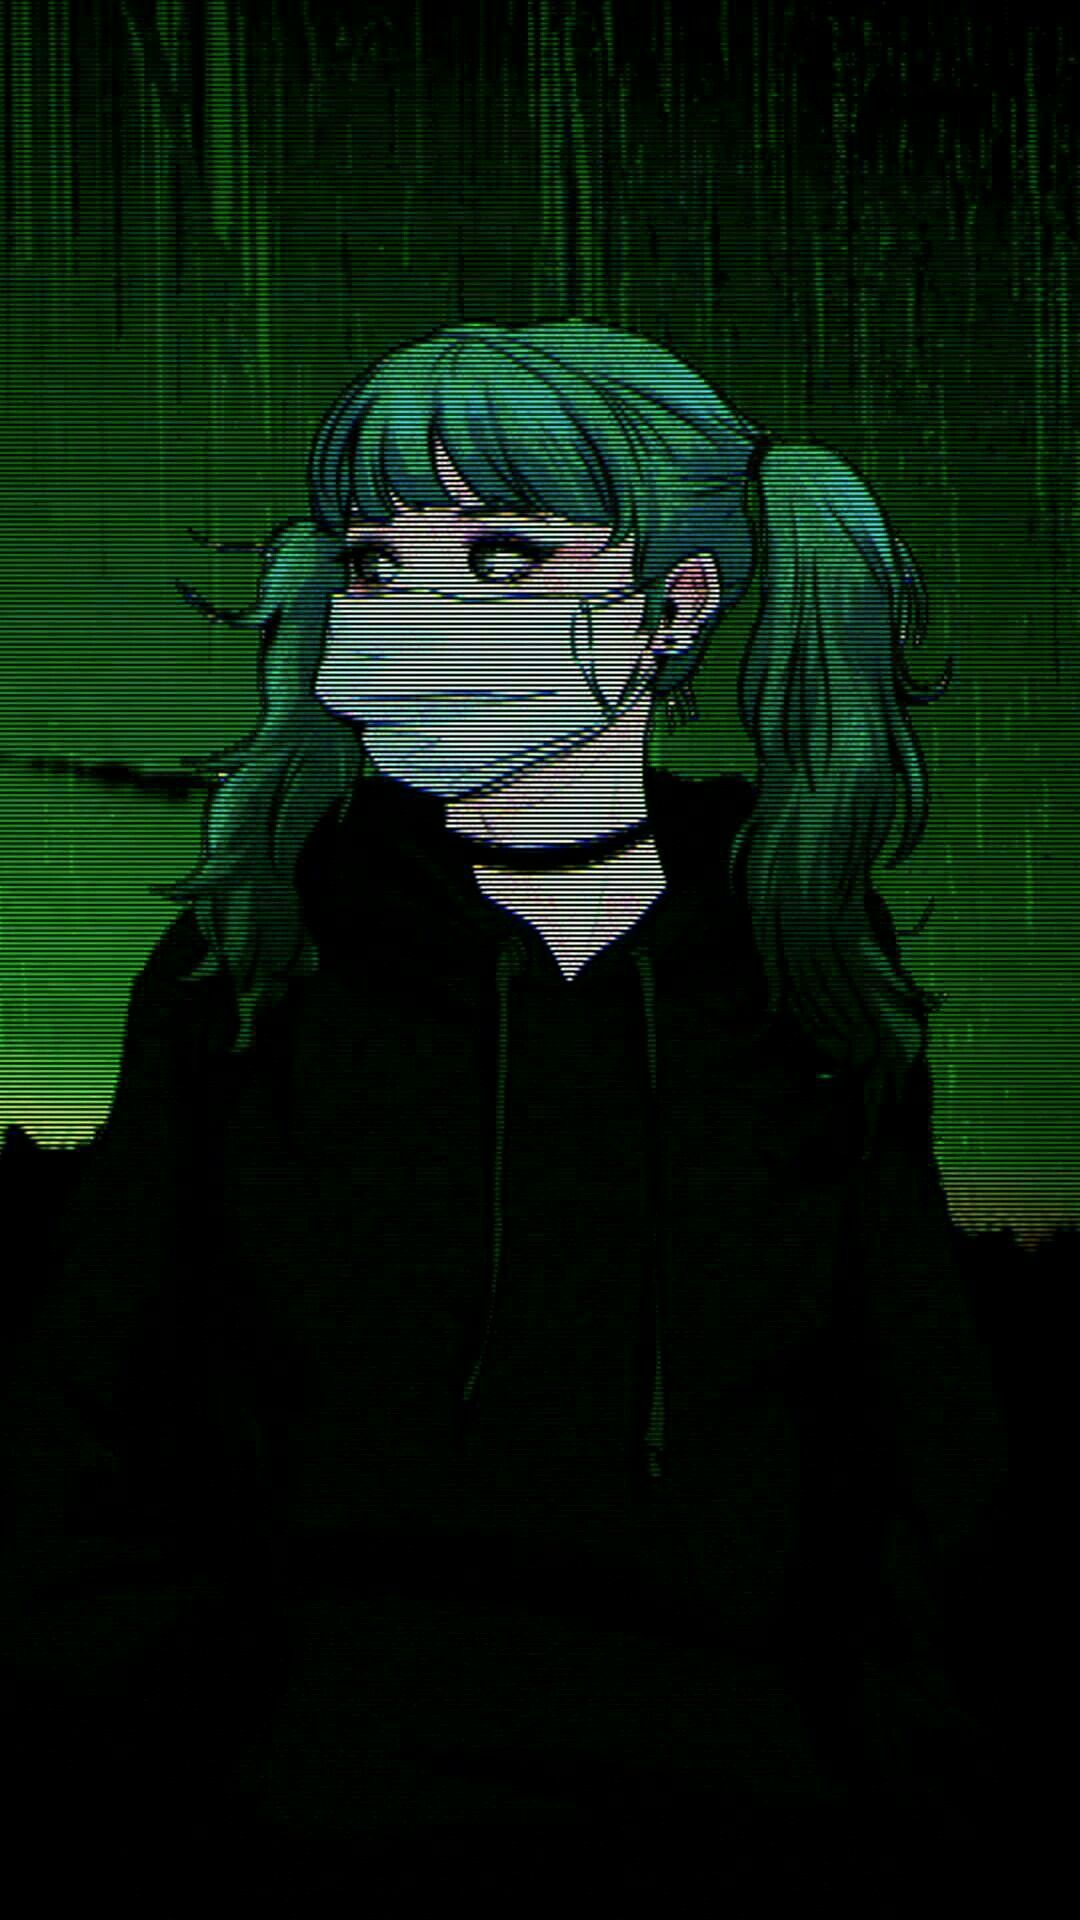 Aesthetic anime girl with green hair and mask in the rain - Anime